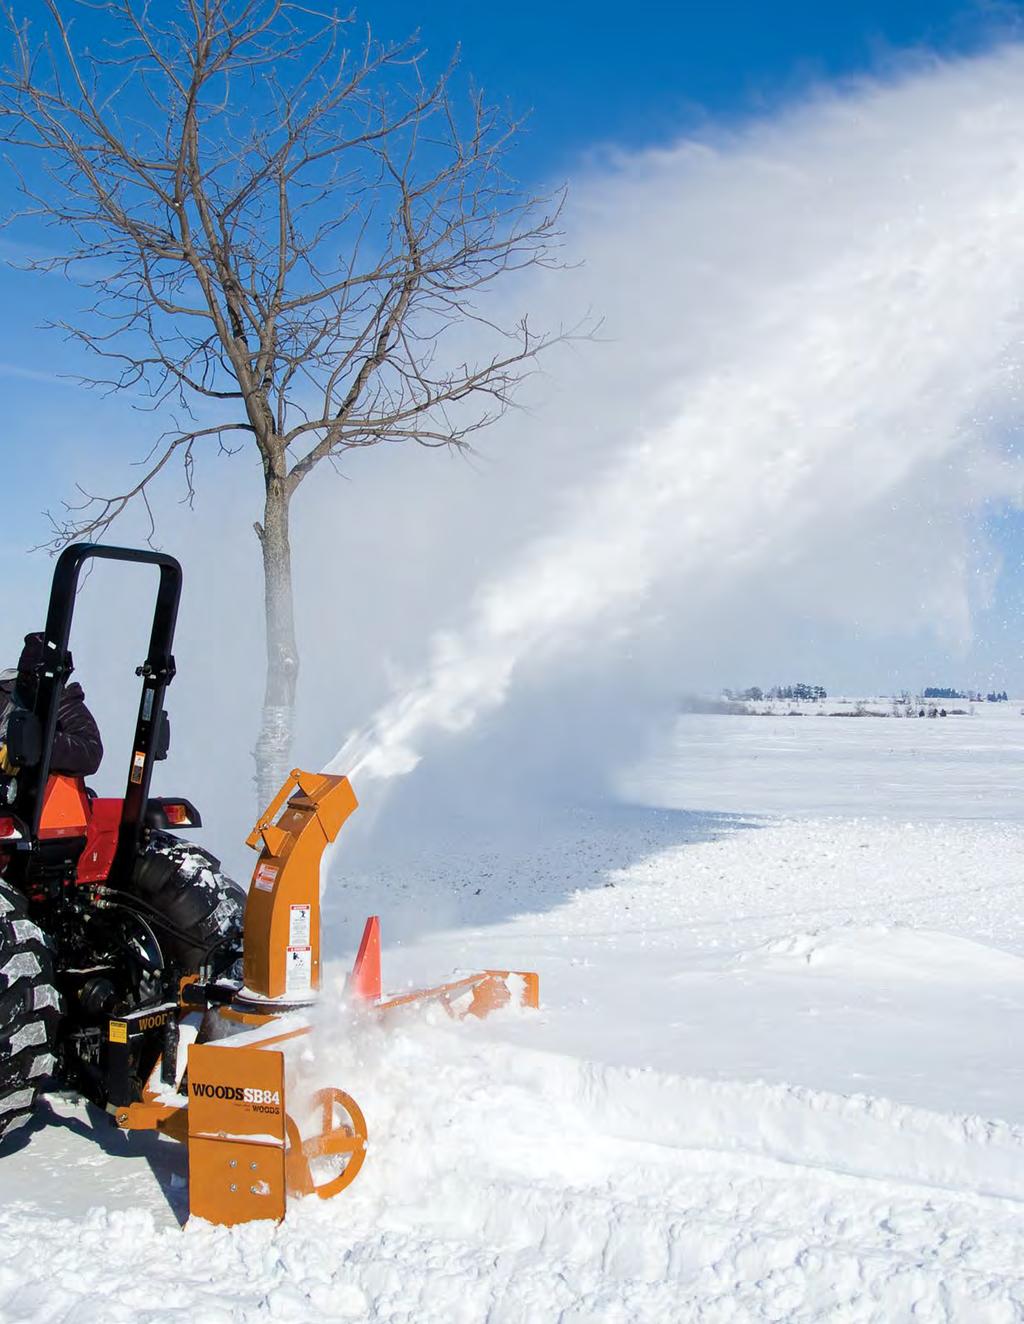 Make quick work of moving all types of snow powder, crusted, icy